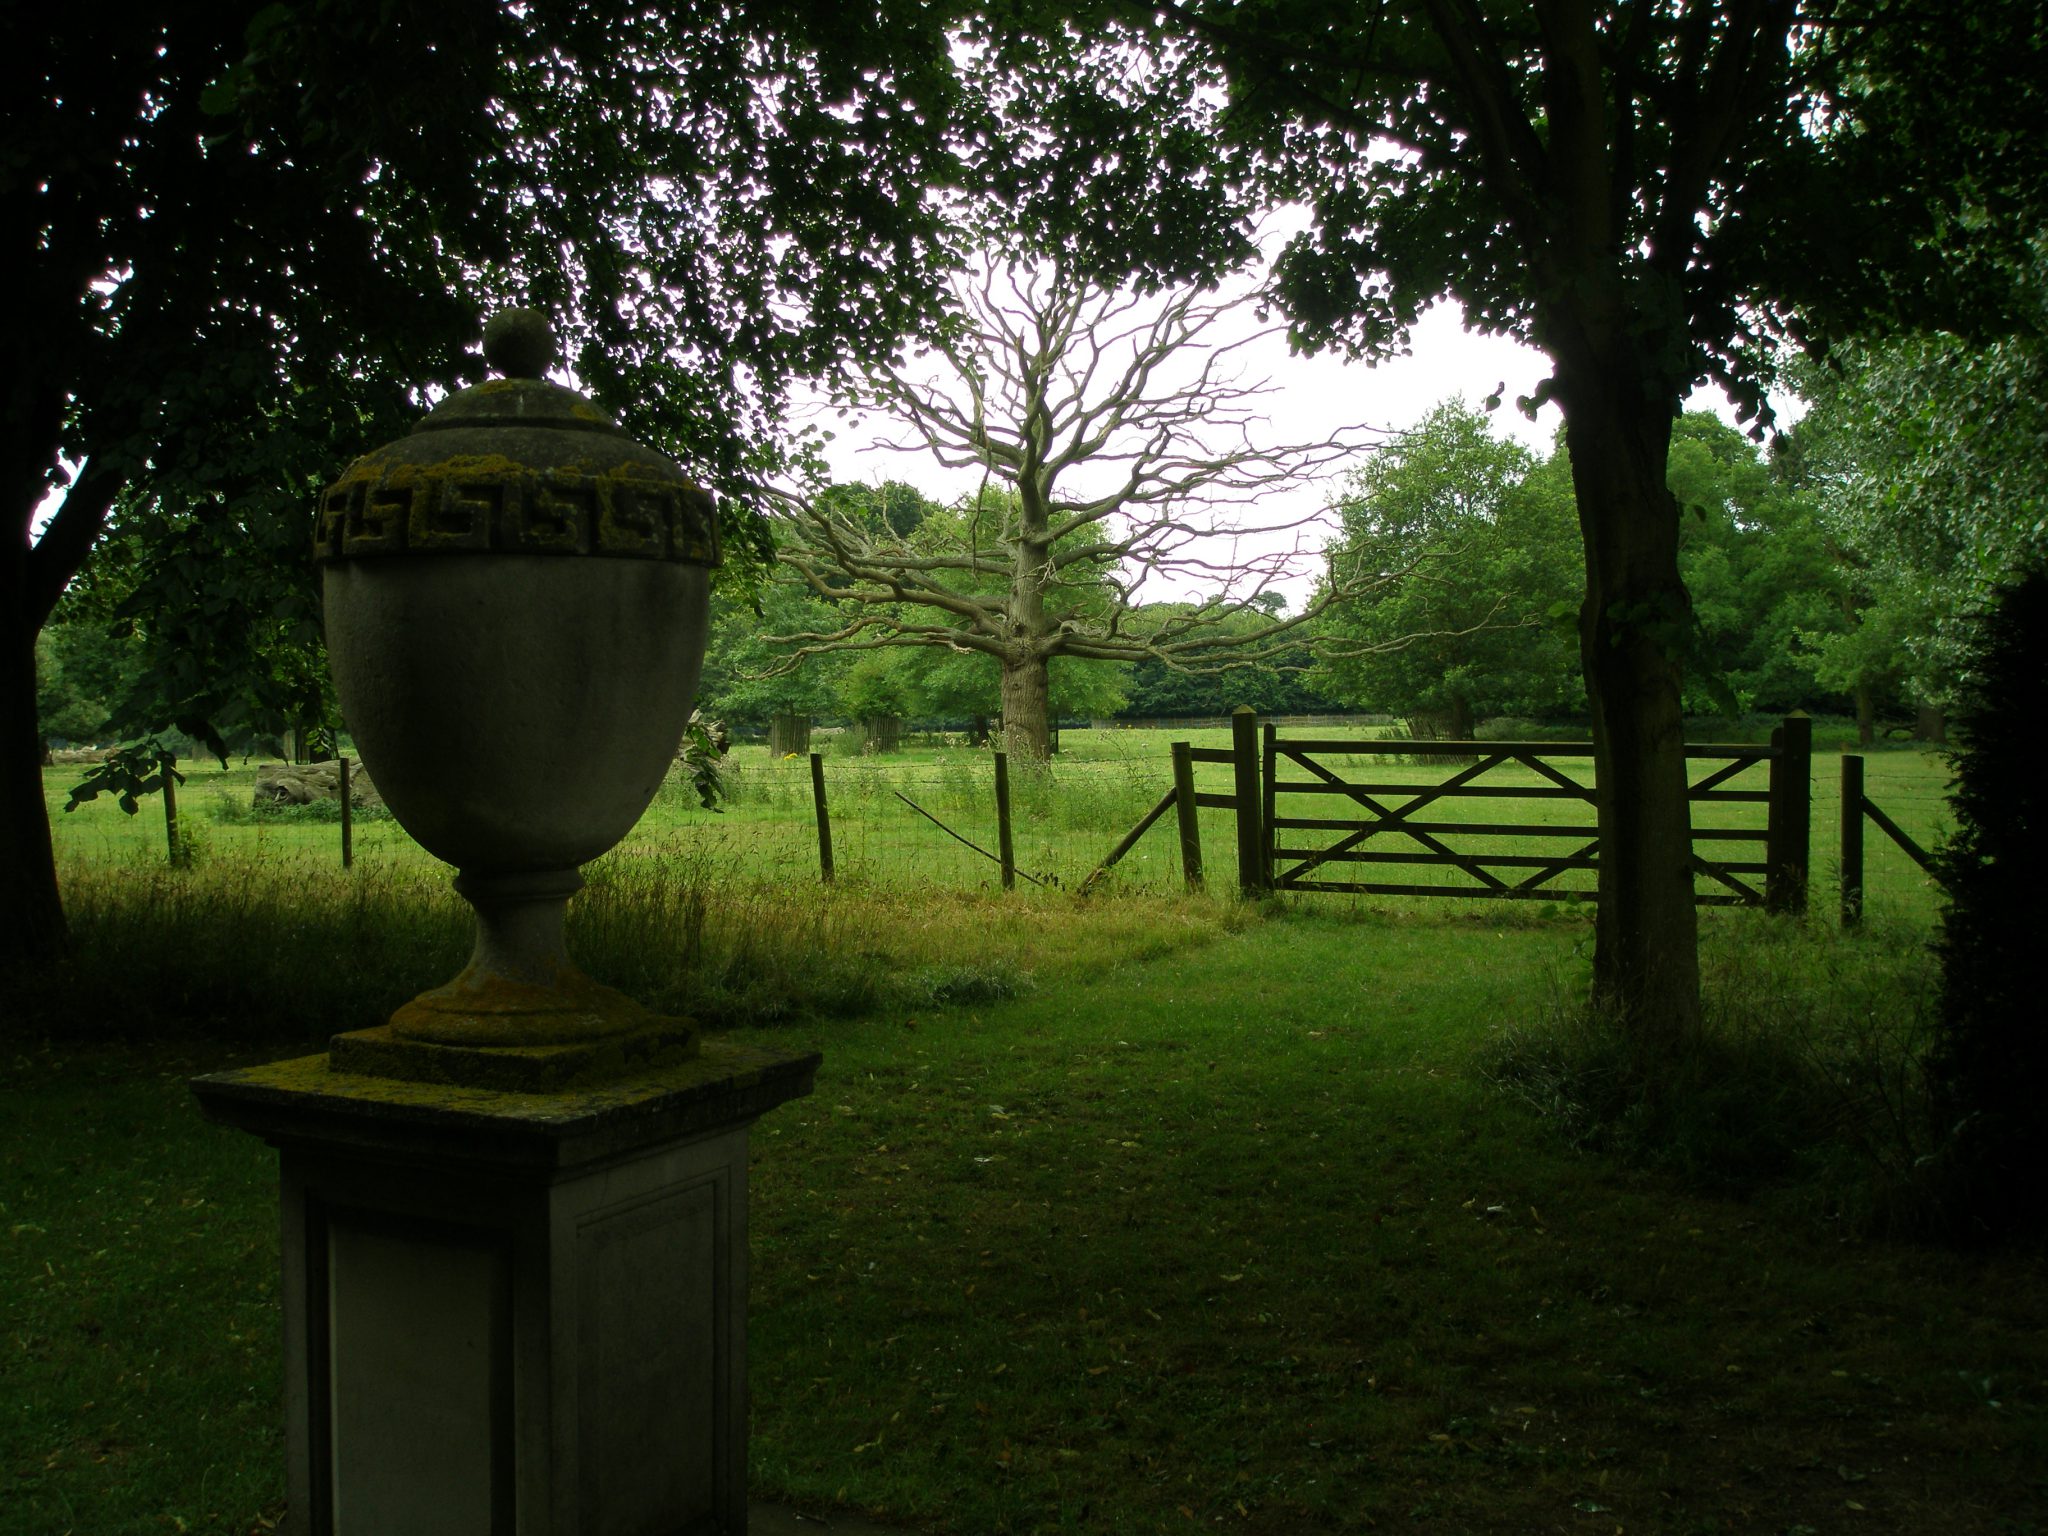 The Urn, at the far end of the Avenue of Lime Trees, with pastureland beyond the fence.